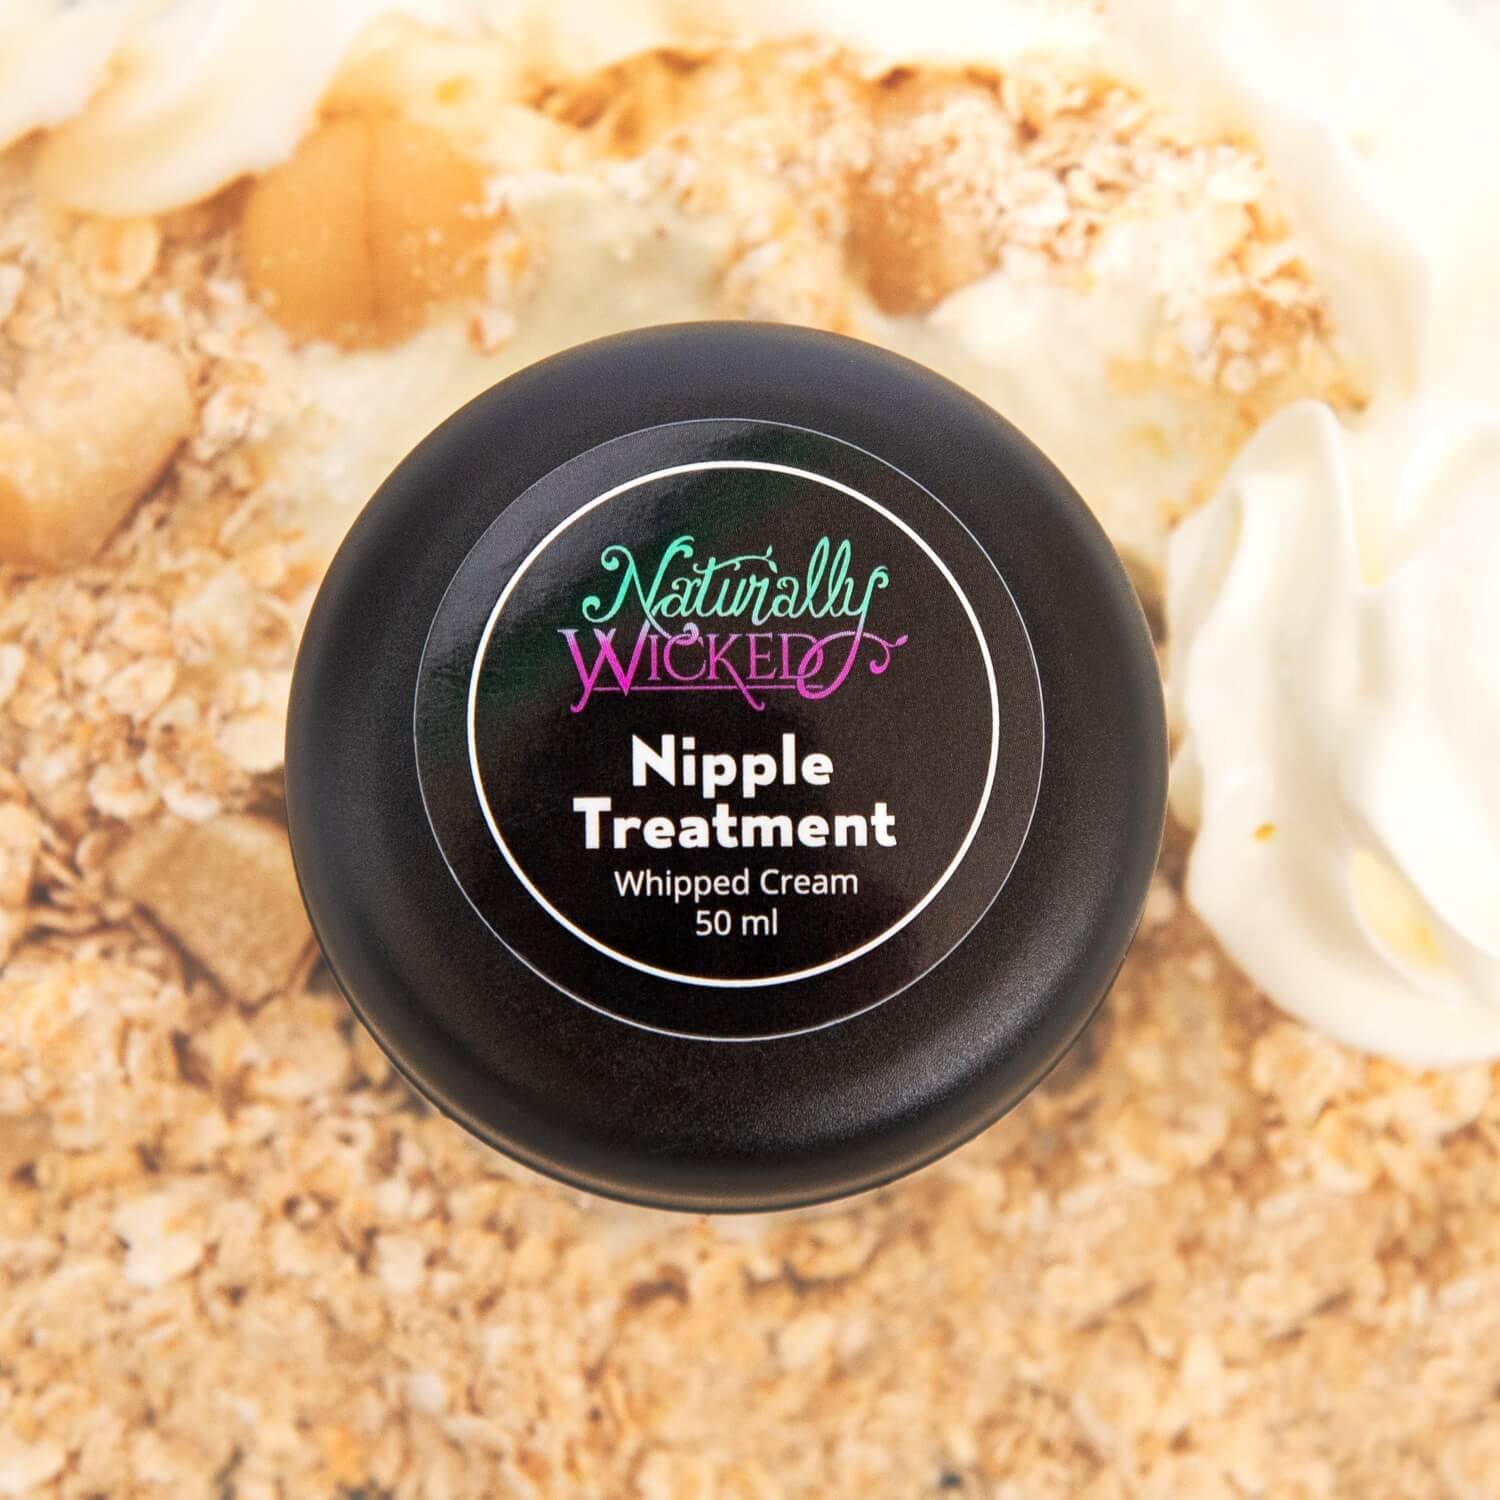 Naturally Wicked Whipped Cream Nipple Treatment For Breastfeeding Mothers Amongst Whipped Cream & Nuts